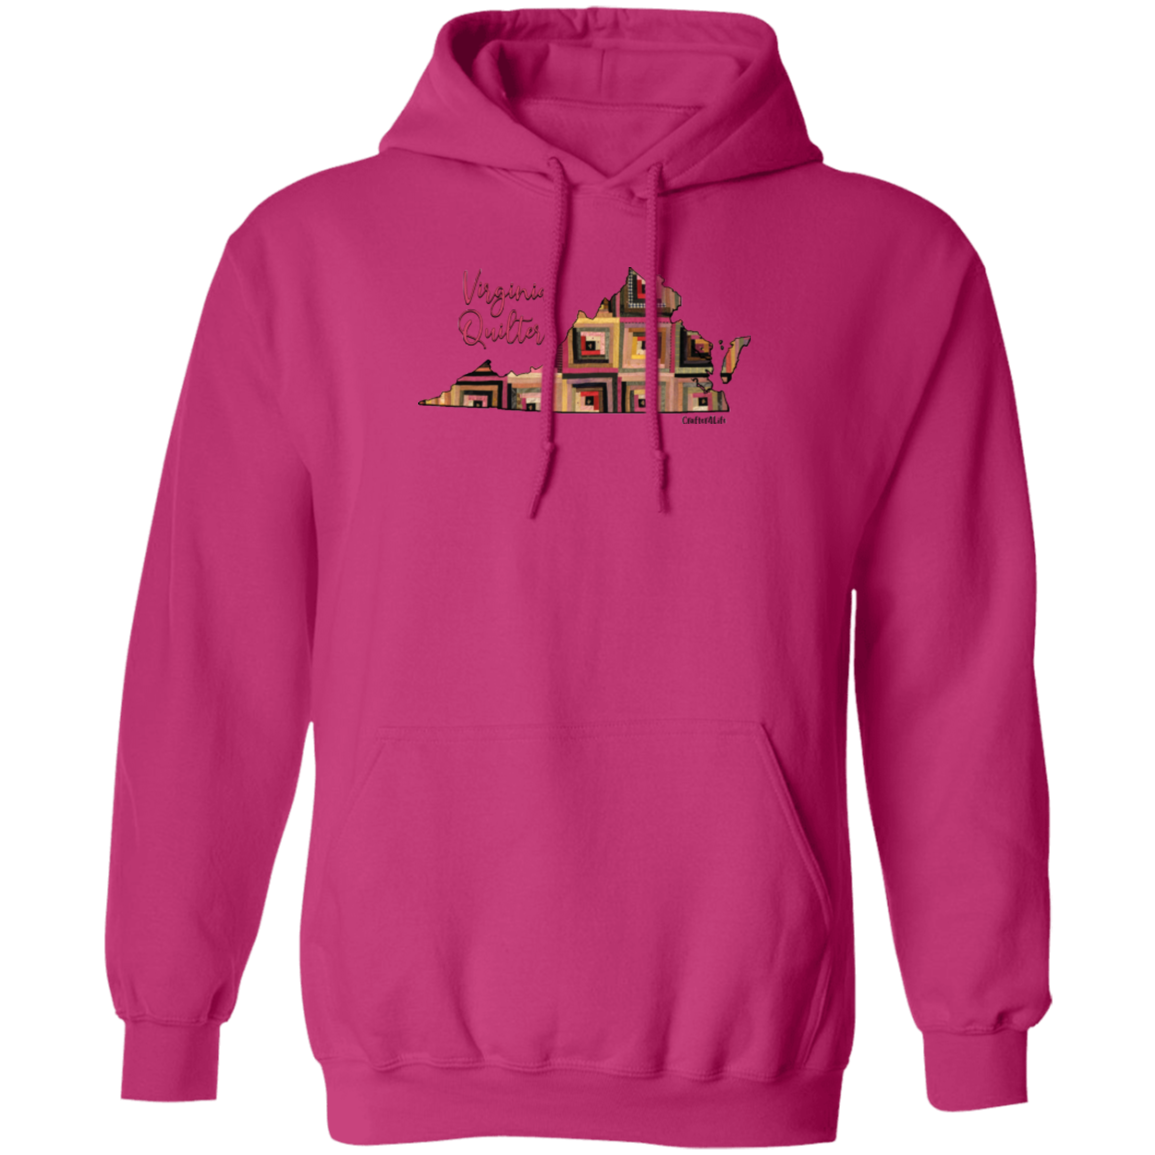 Virginia Quilter Pullover Hoodie, Gift for Quilting Friends and Family